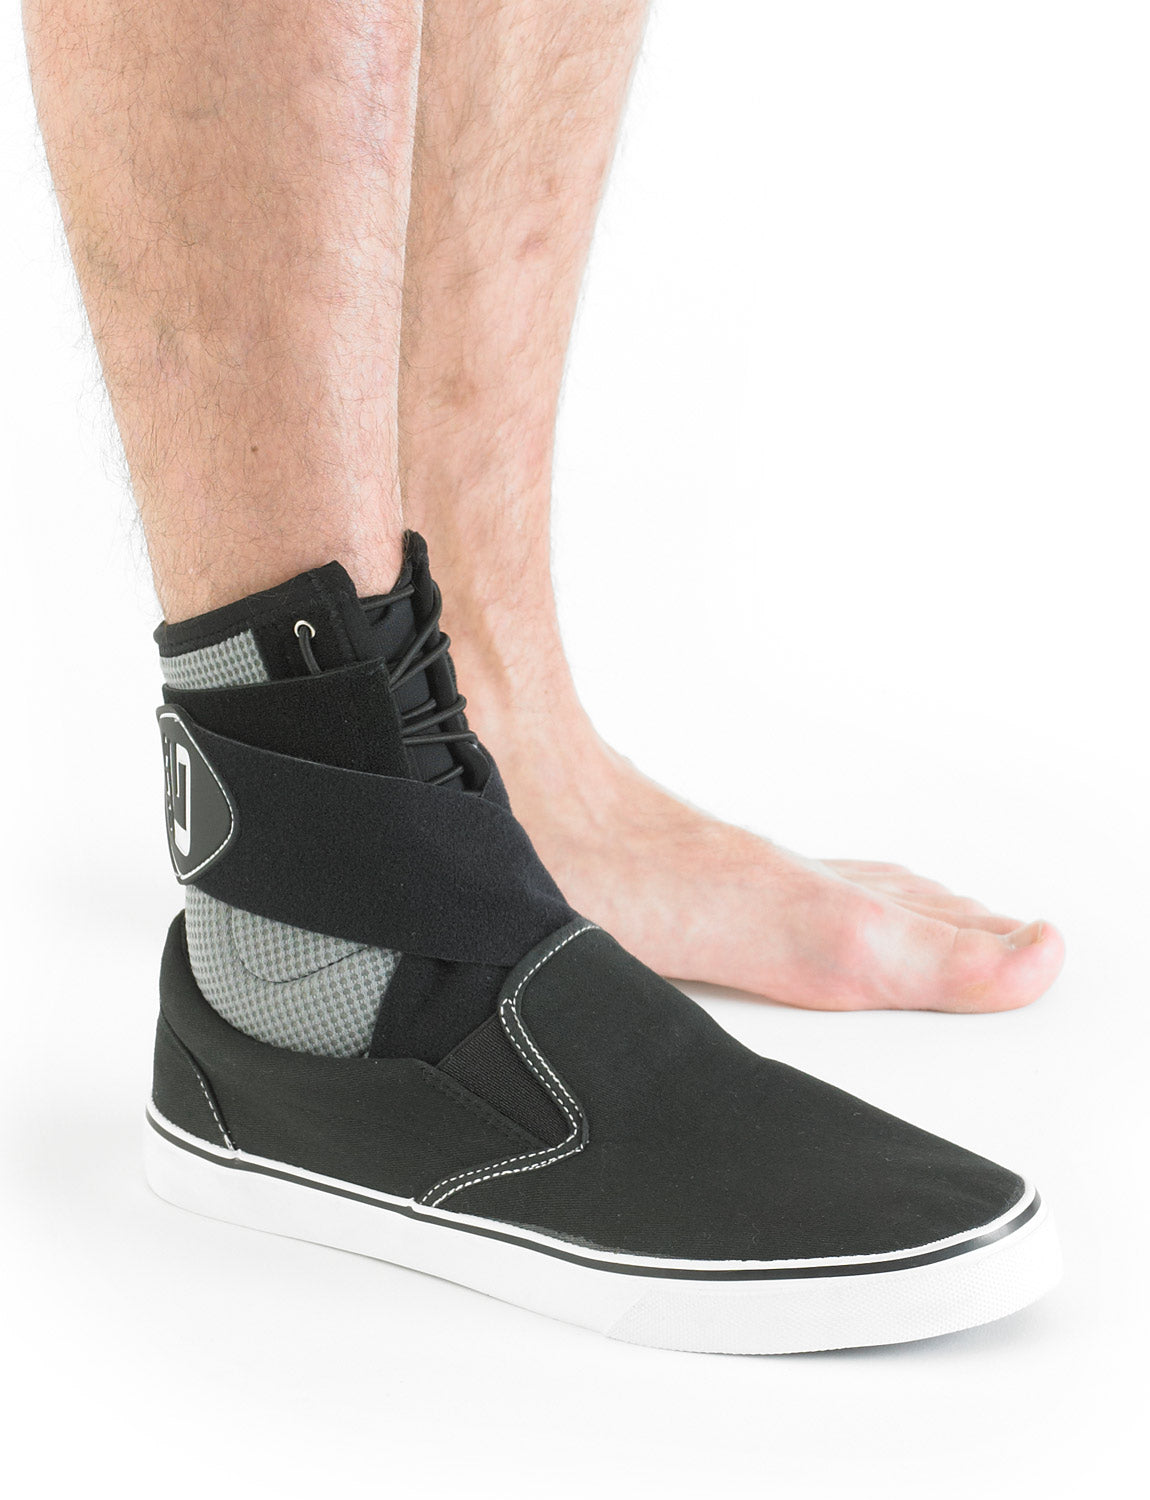 Rehab Xcelerator Stabilized Ankle Support